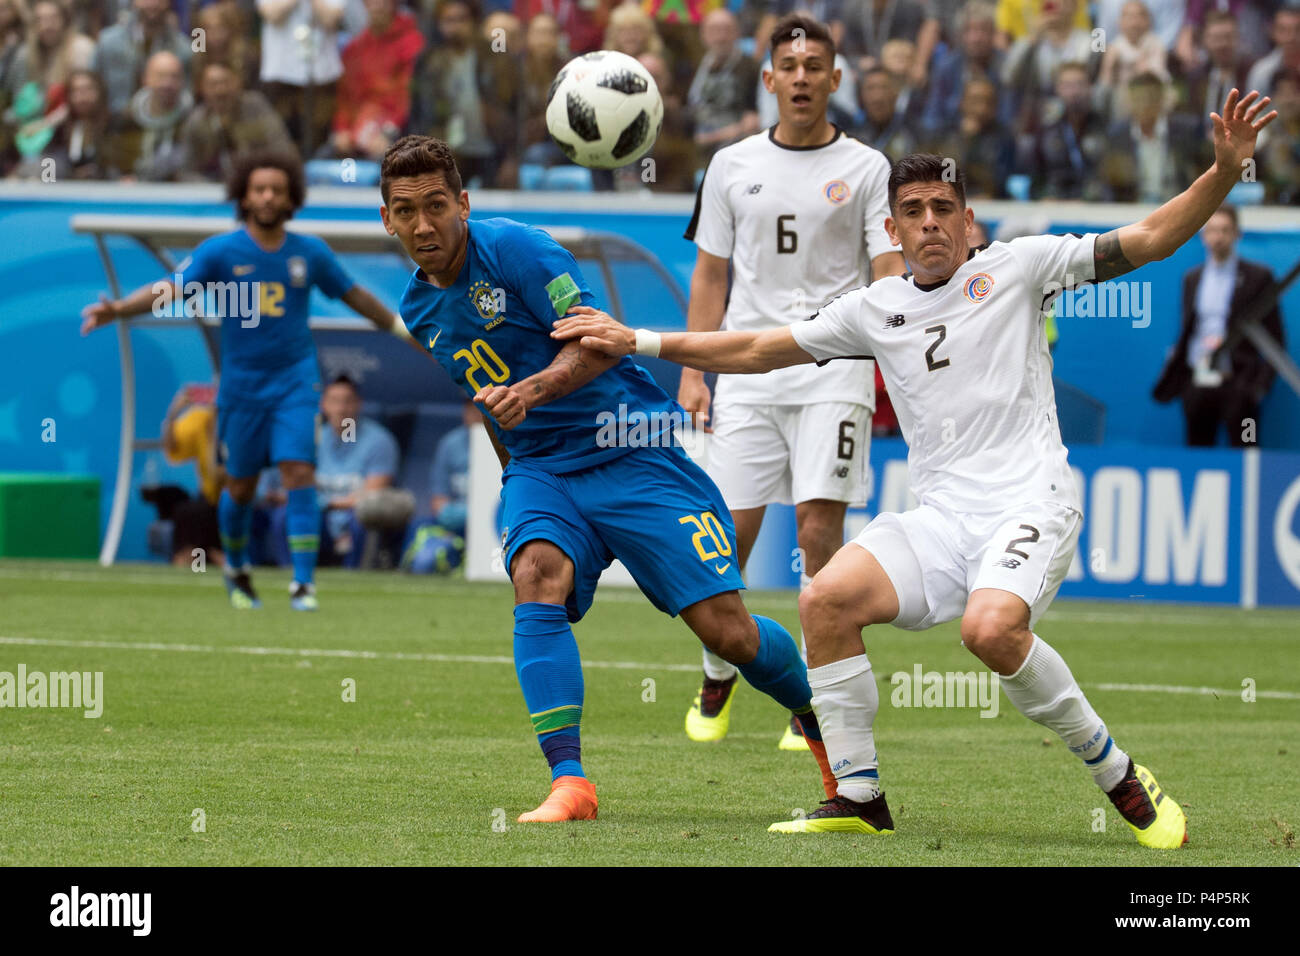 22 June 2018, Russia, Saint Petersburg, Soccer, Group E, Matchday 2 of 3, Brazil vs Costa Rica at the St. Petersburg Stadium: Roberto Firmino (L) from Brazil and Johnny Acosta from Costa Rica vie for the ball. Photo: Federico Gambarini/dpa Credit: dpa picture alliance/Alamy Live News Stock Photo